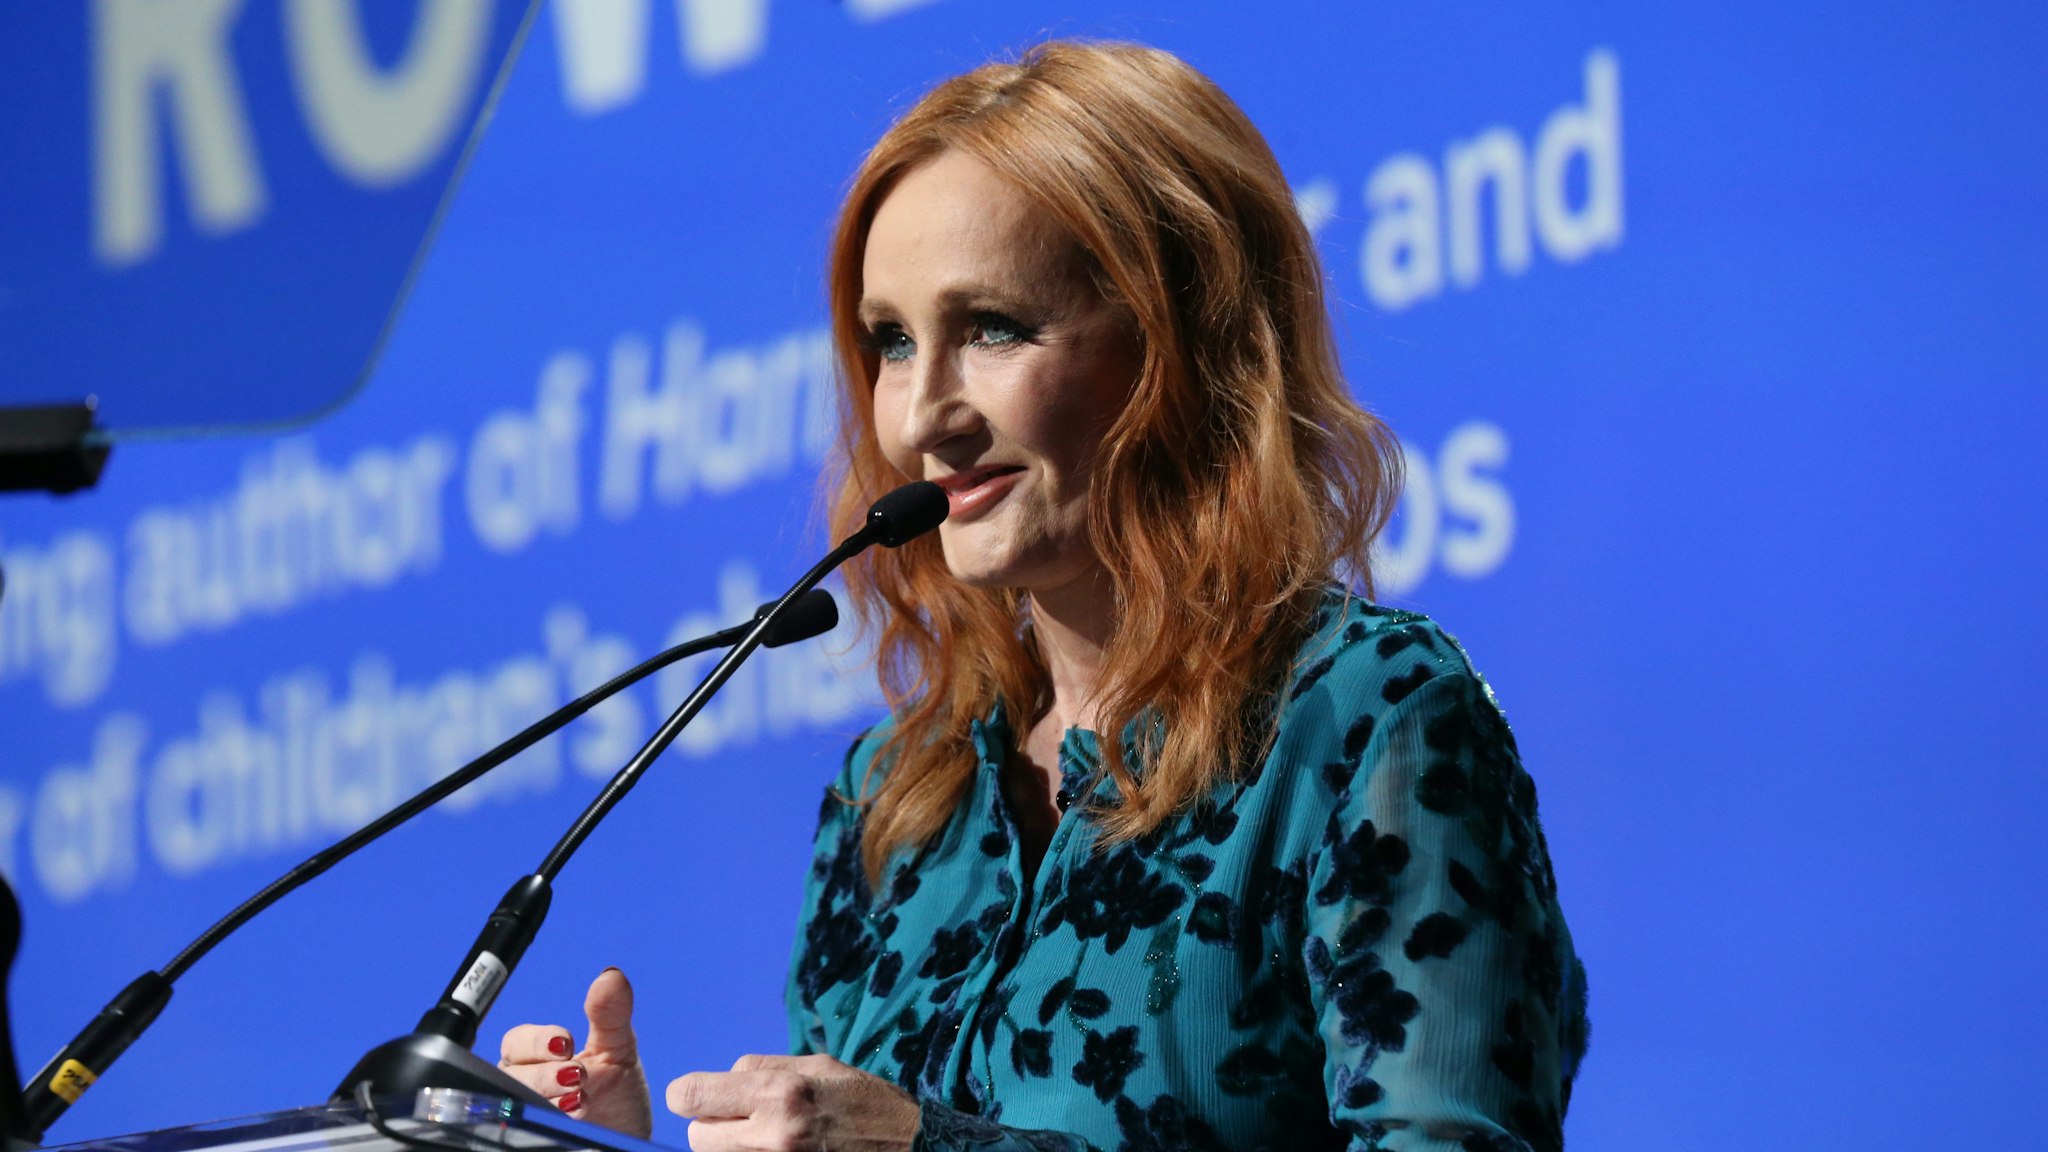 J.K. Rowling accepts an award onstage during the Robert F. Kennedy Human Rights Hosts 2019 Ripple Of Hope Gala & Auction In NYC on December 12, 2019 in New York City. (Photo by Bennett Raglin/Getty Images for for Robert F. Kennedy Human Rights)